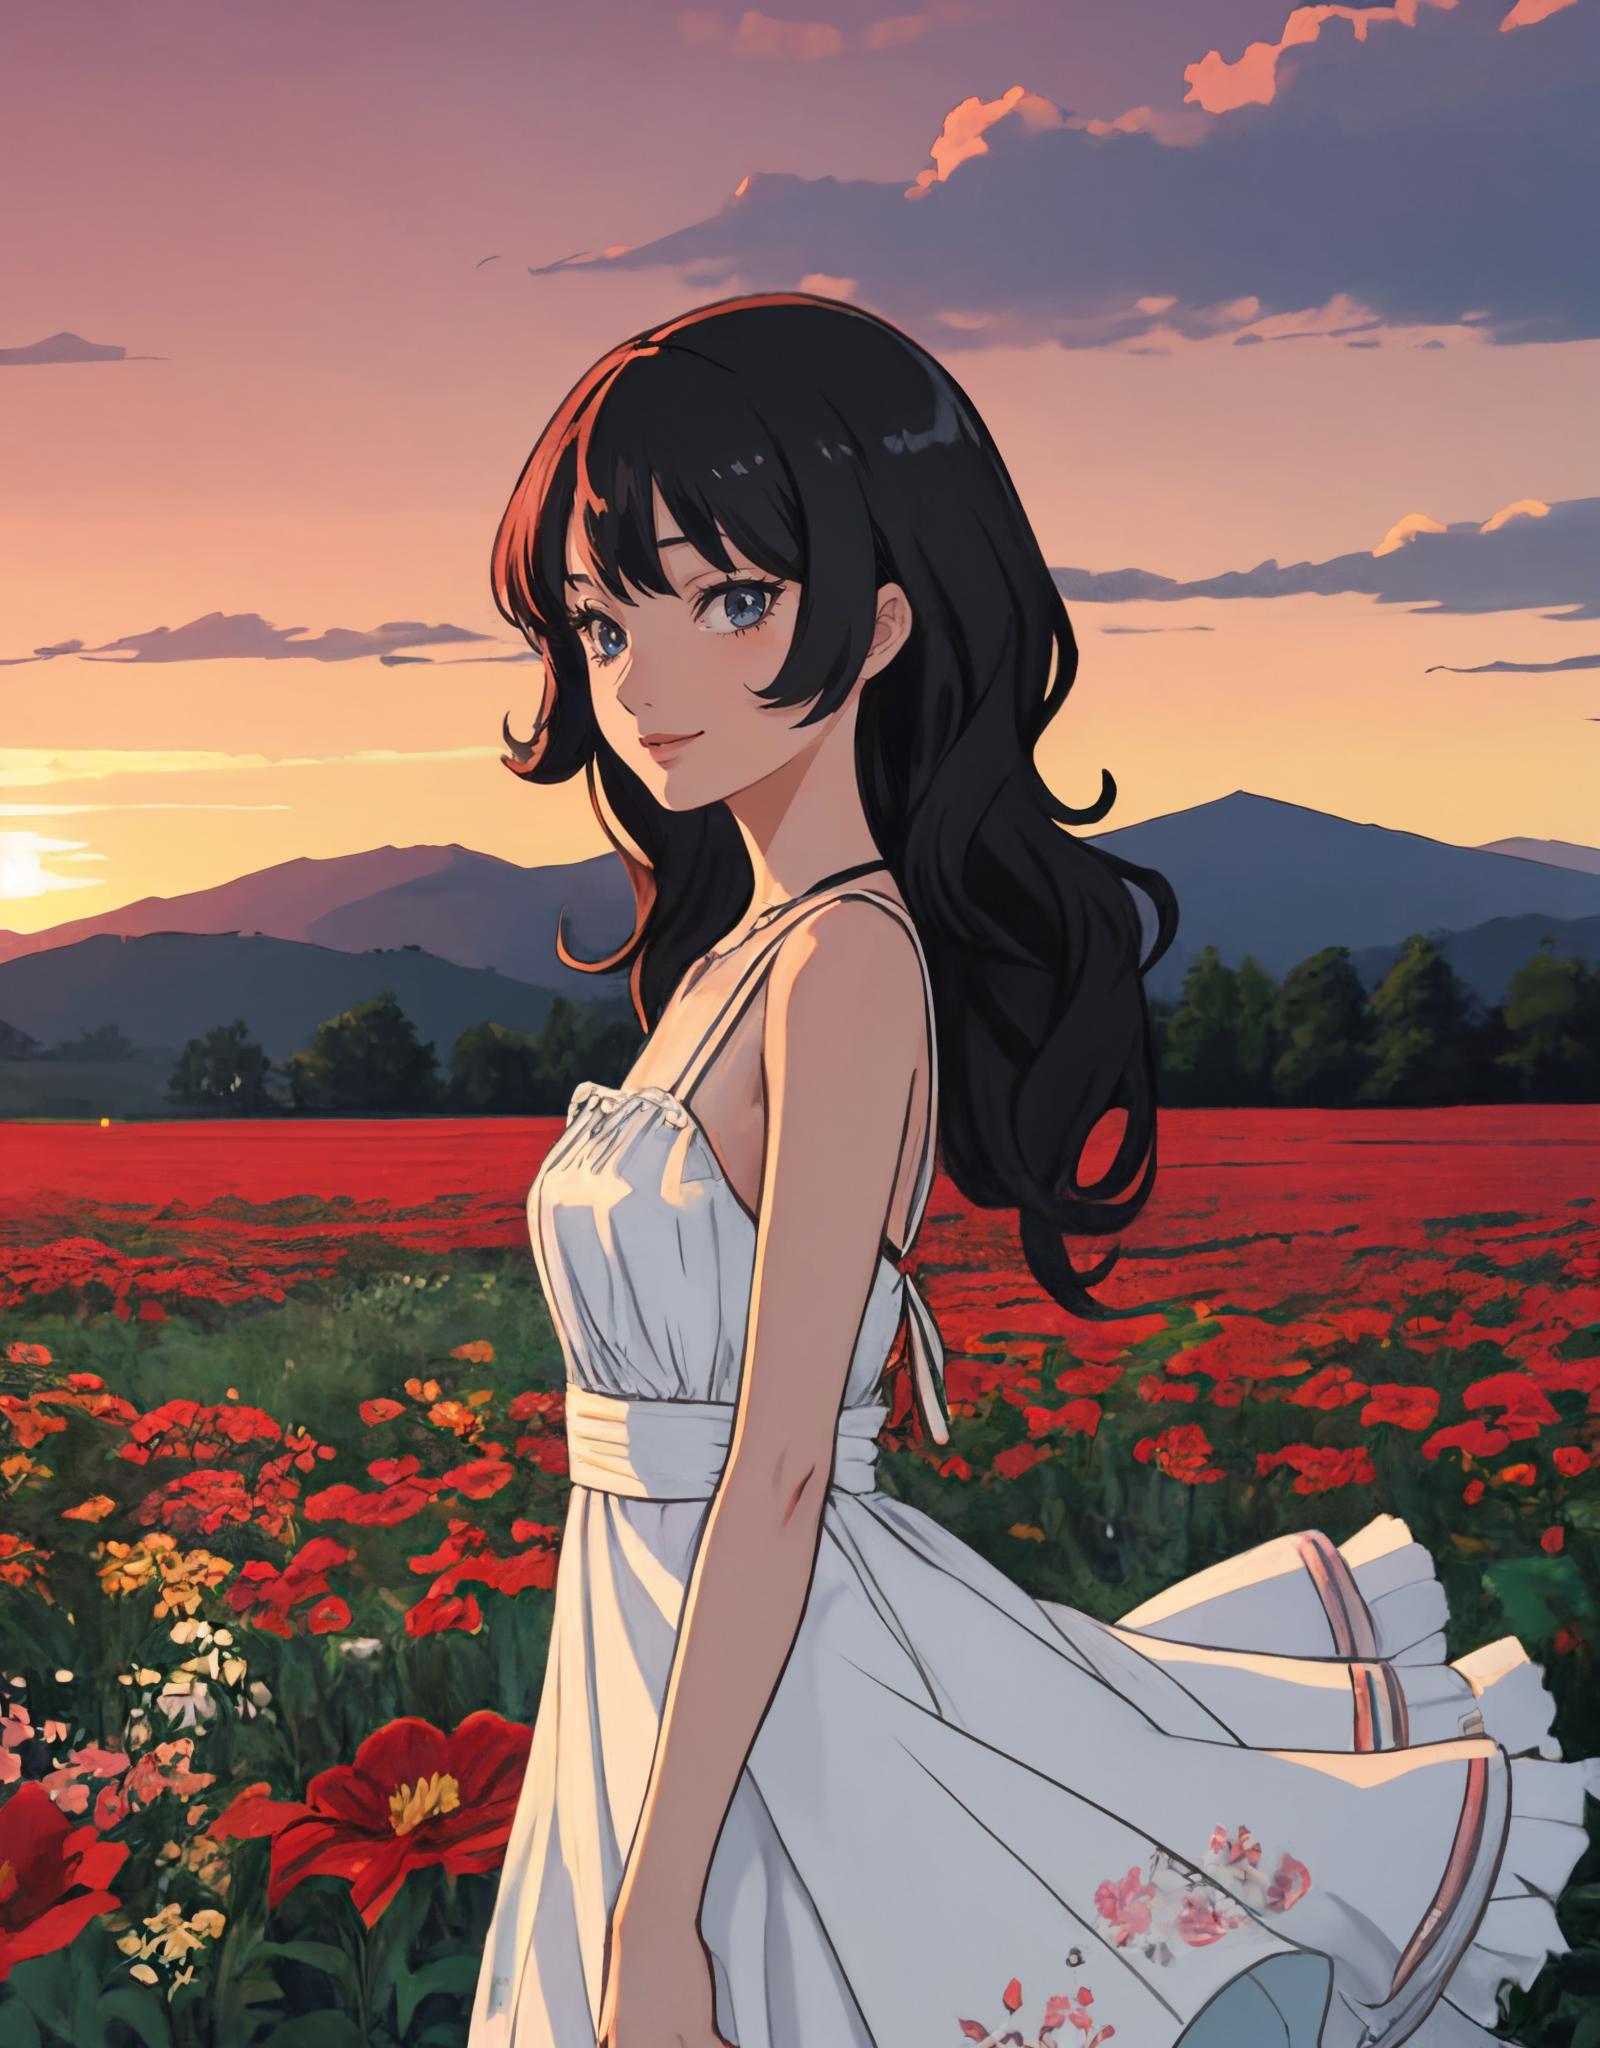 A beautiful woman with long black hair wearing a white dress and standing in a field of flowers.